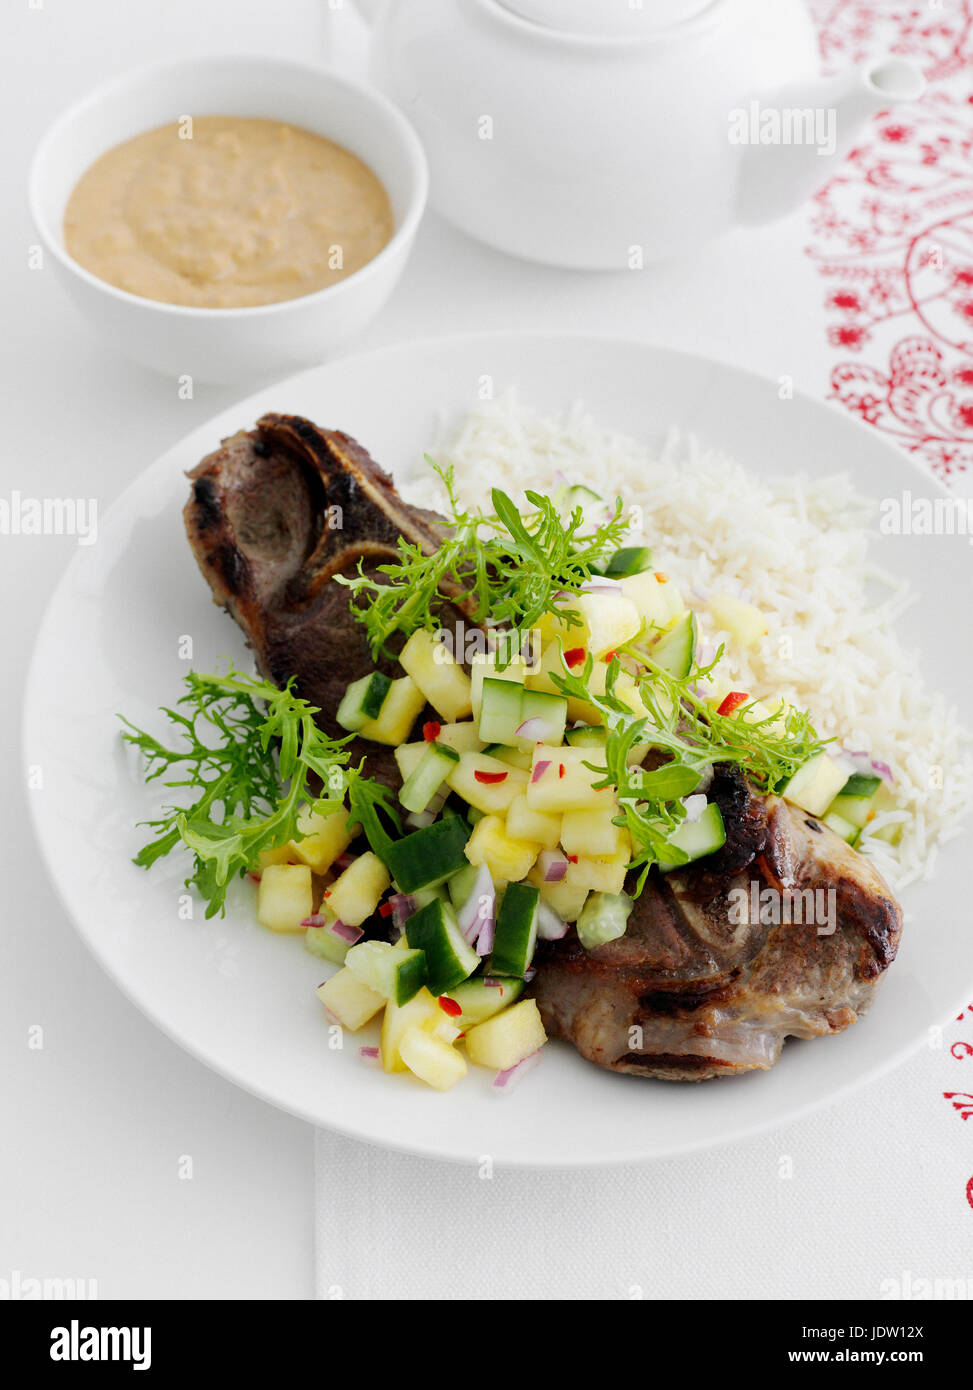 Plate of meat with chopped vegetables Stock Photo